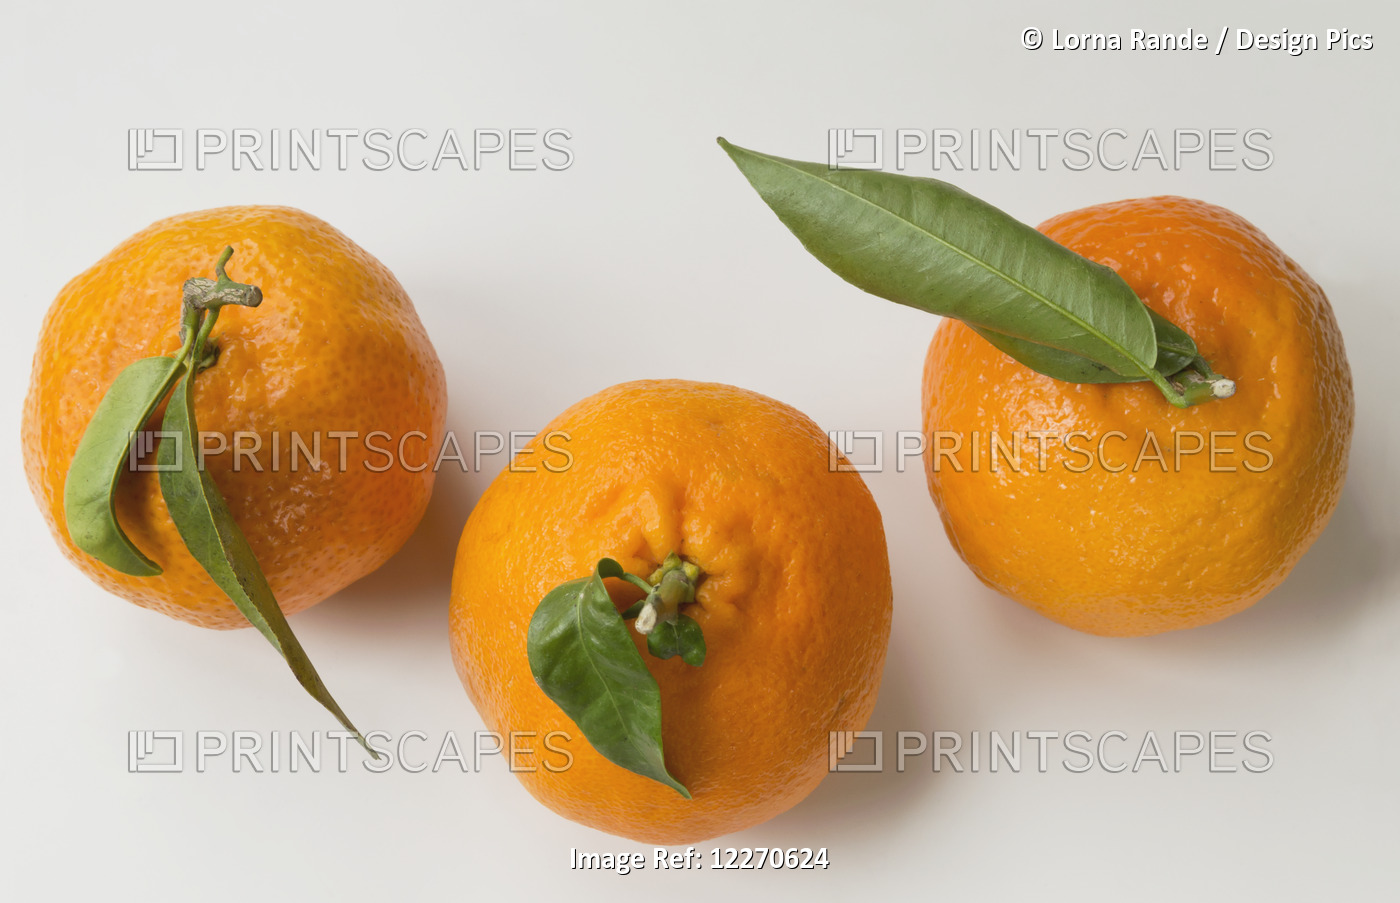 Oranges With Leaves On The Stem; Chilliwack, British Columbia, Canada